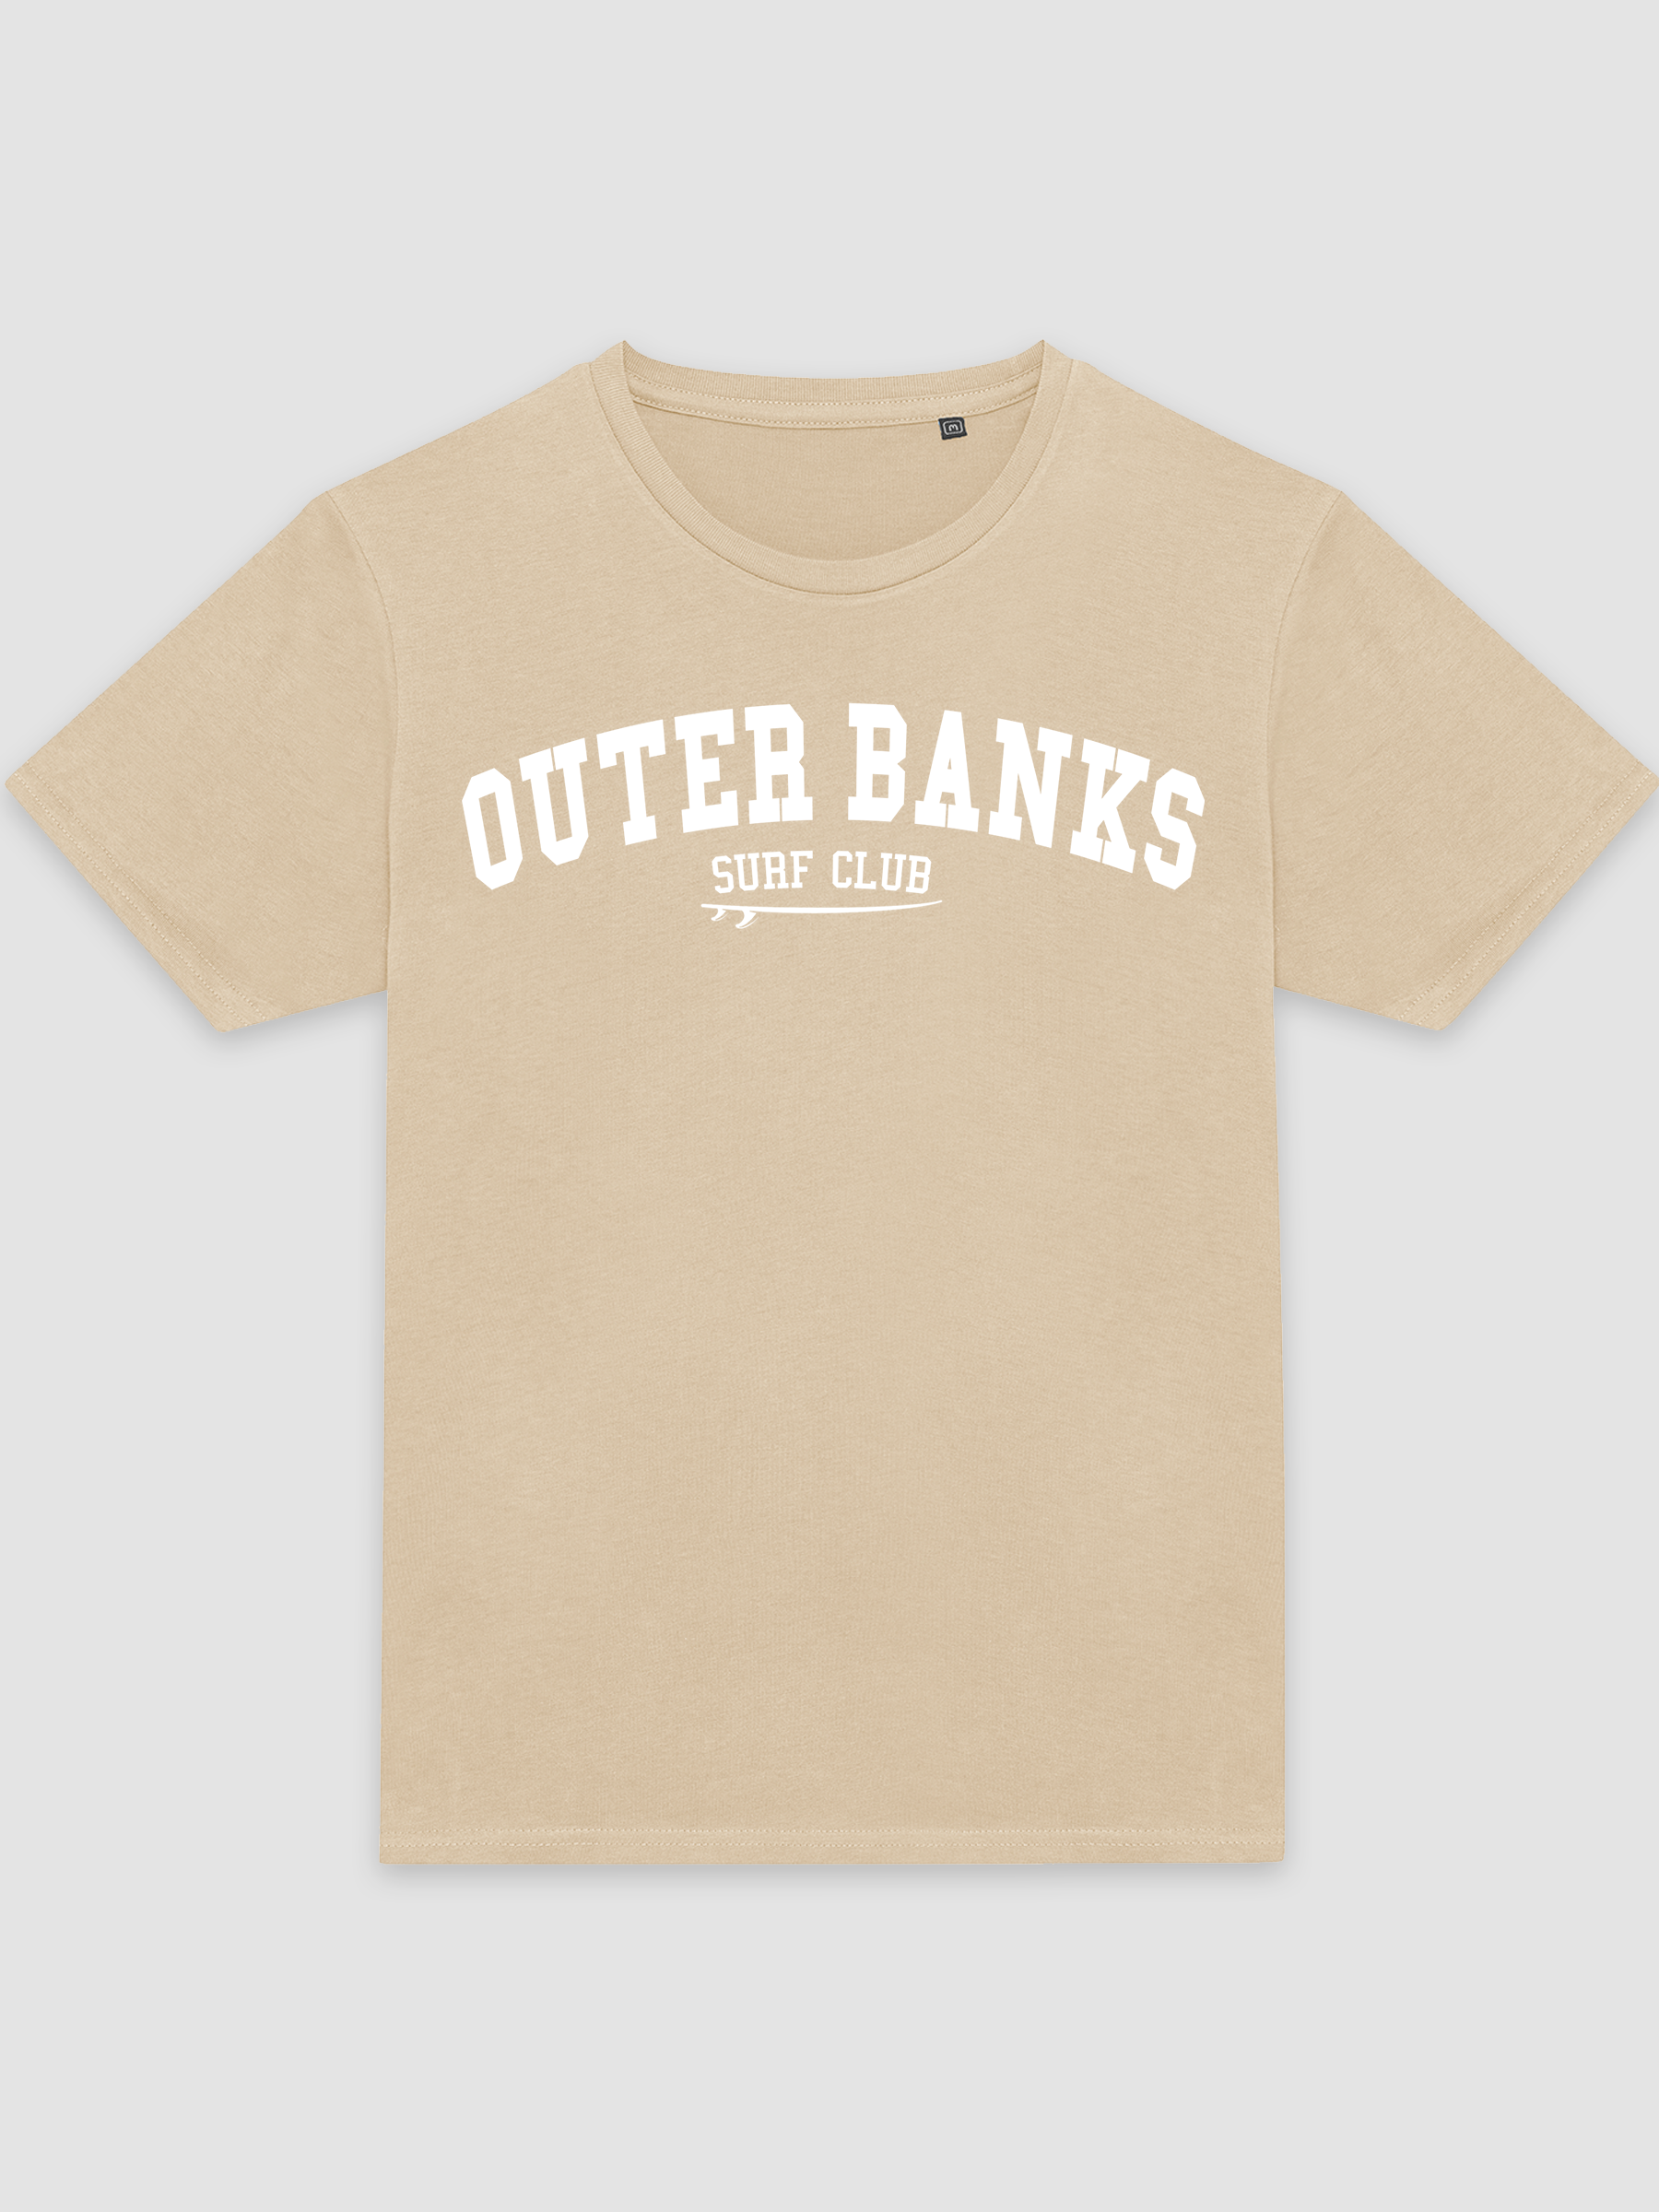 Outer Banks - Sand T-Shirt